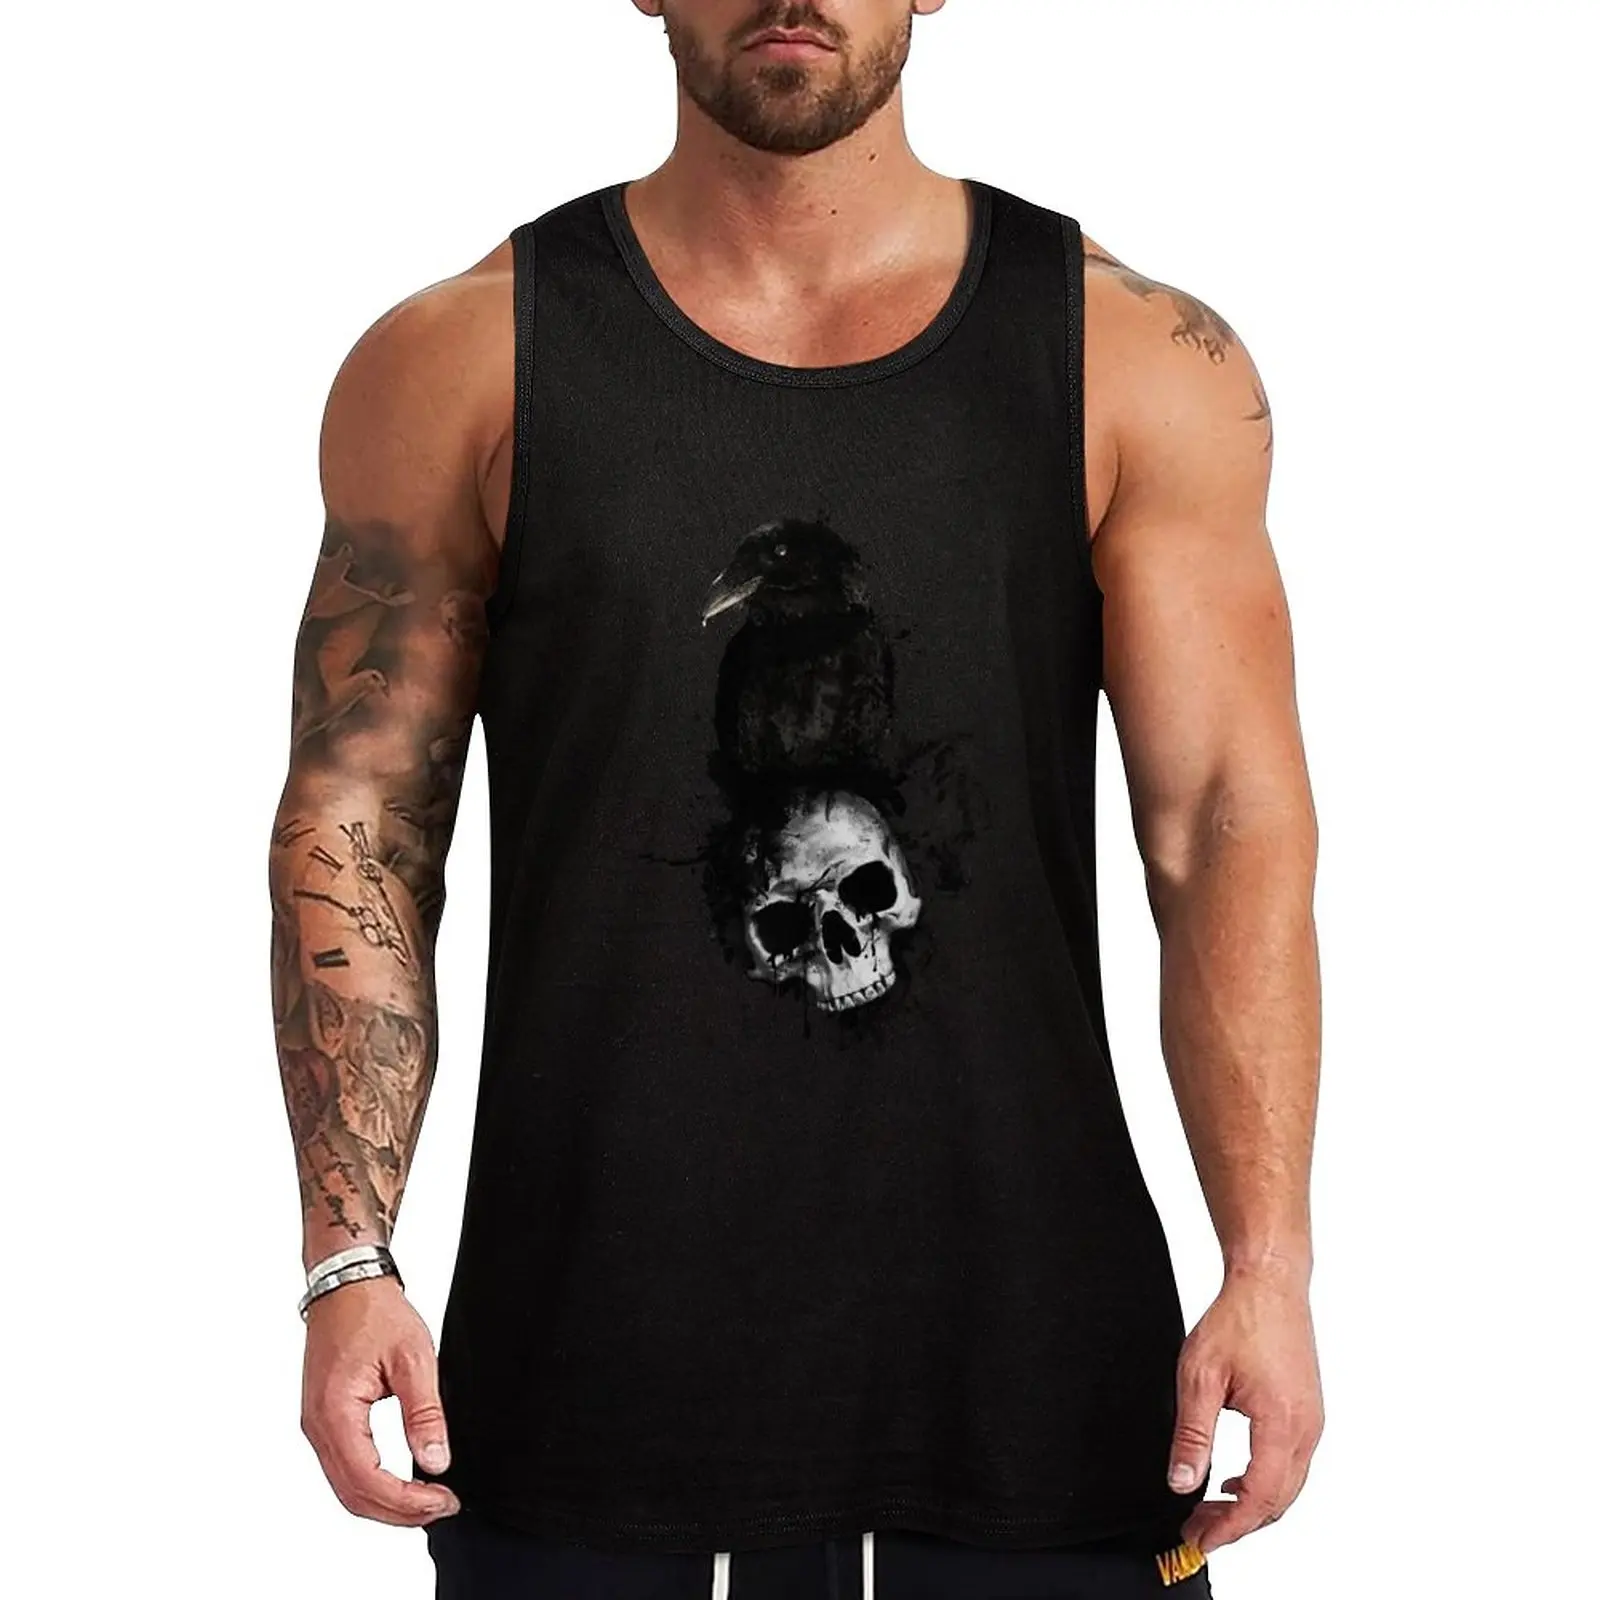 

New Raven and Skull Tank Top fitness gym muscular man cool things